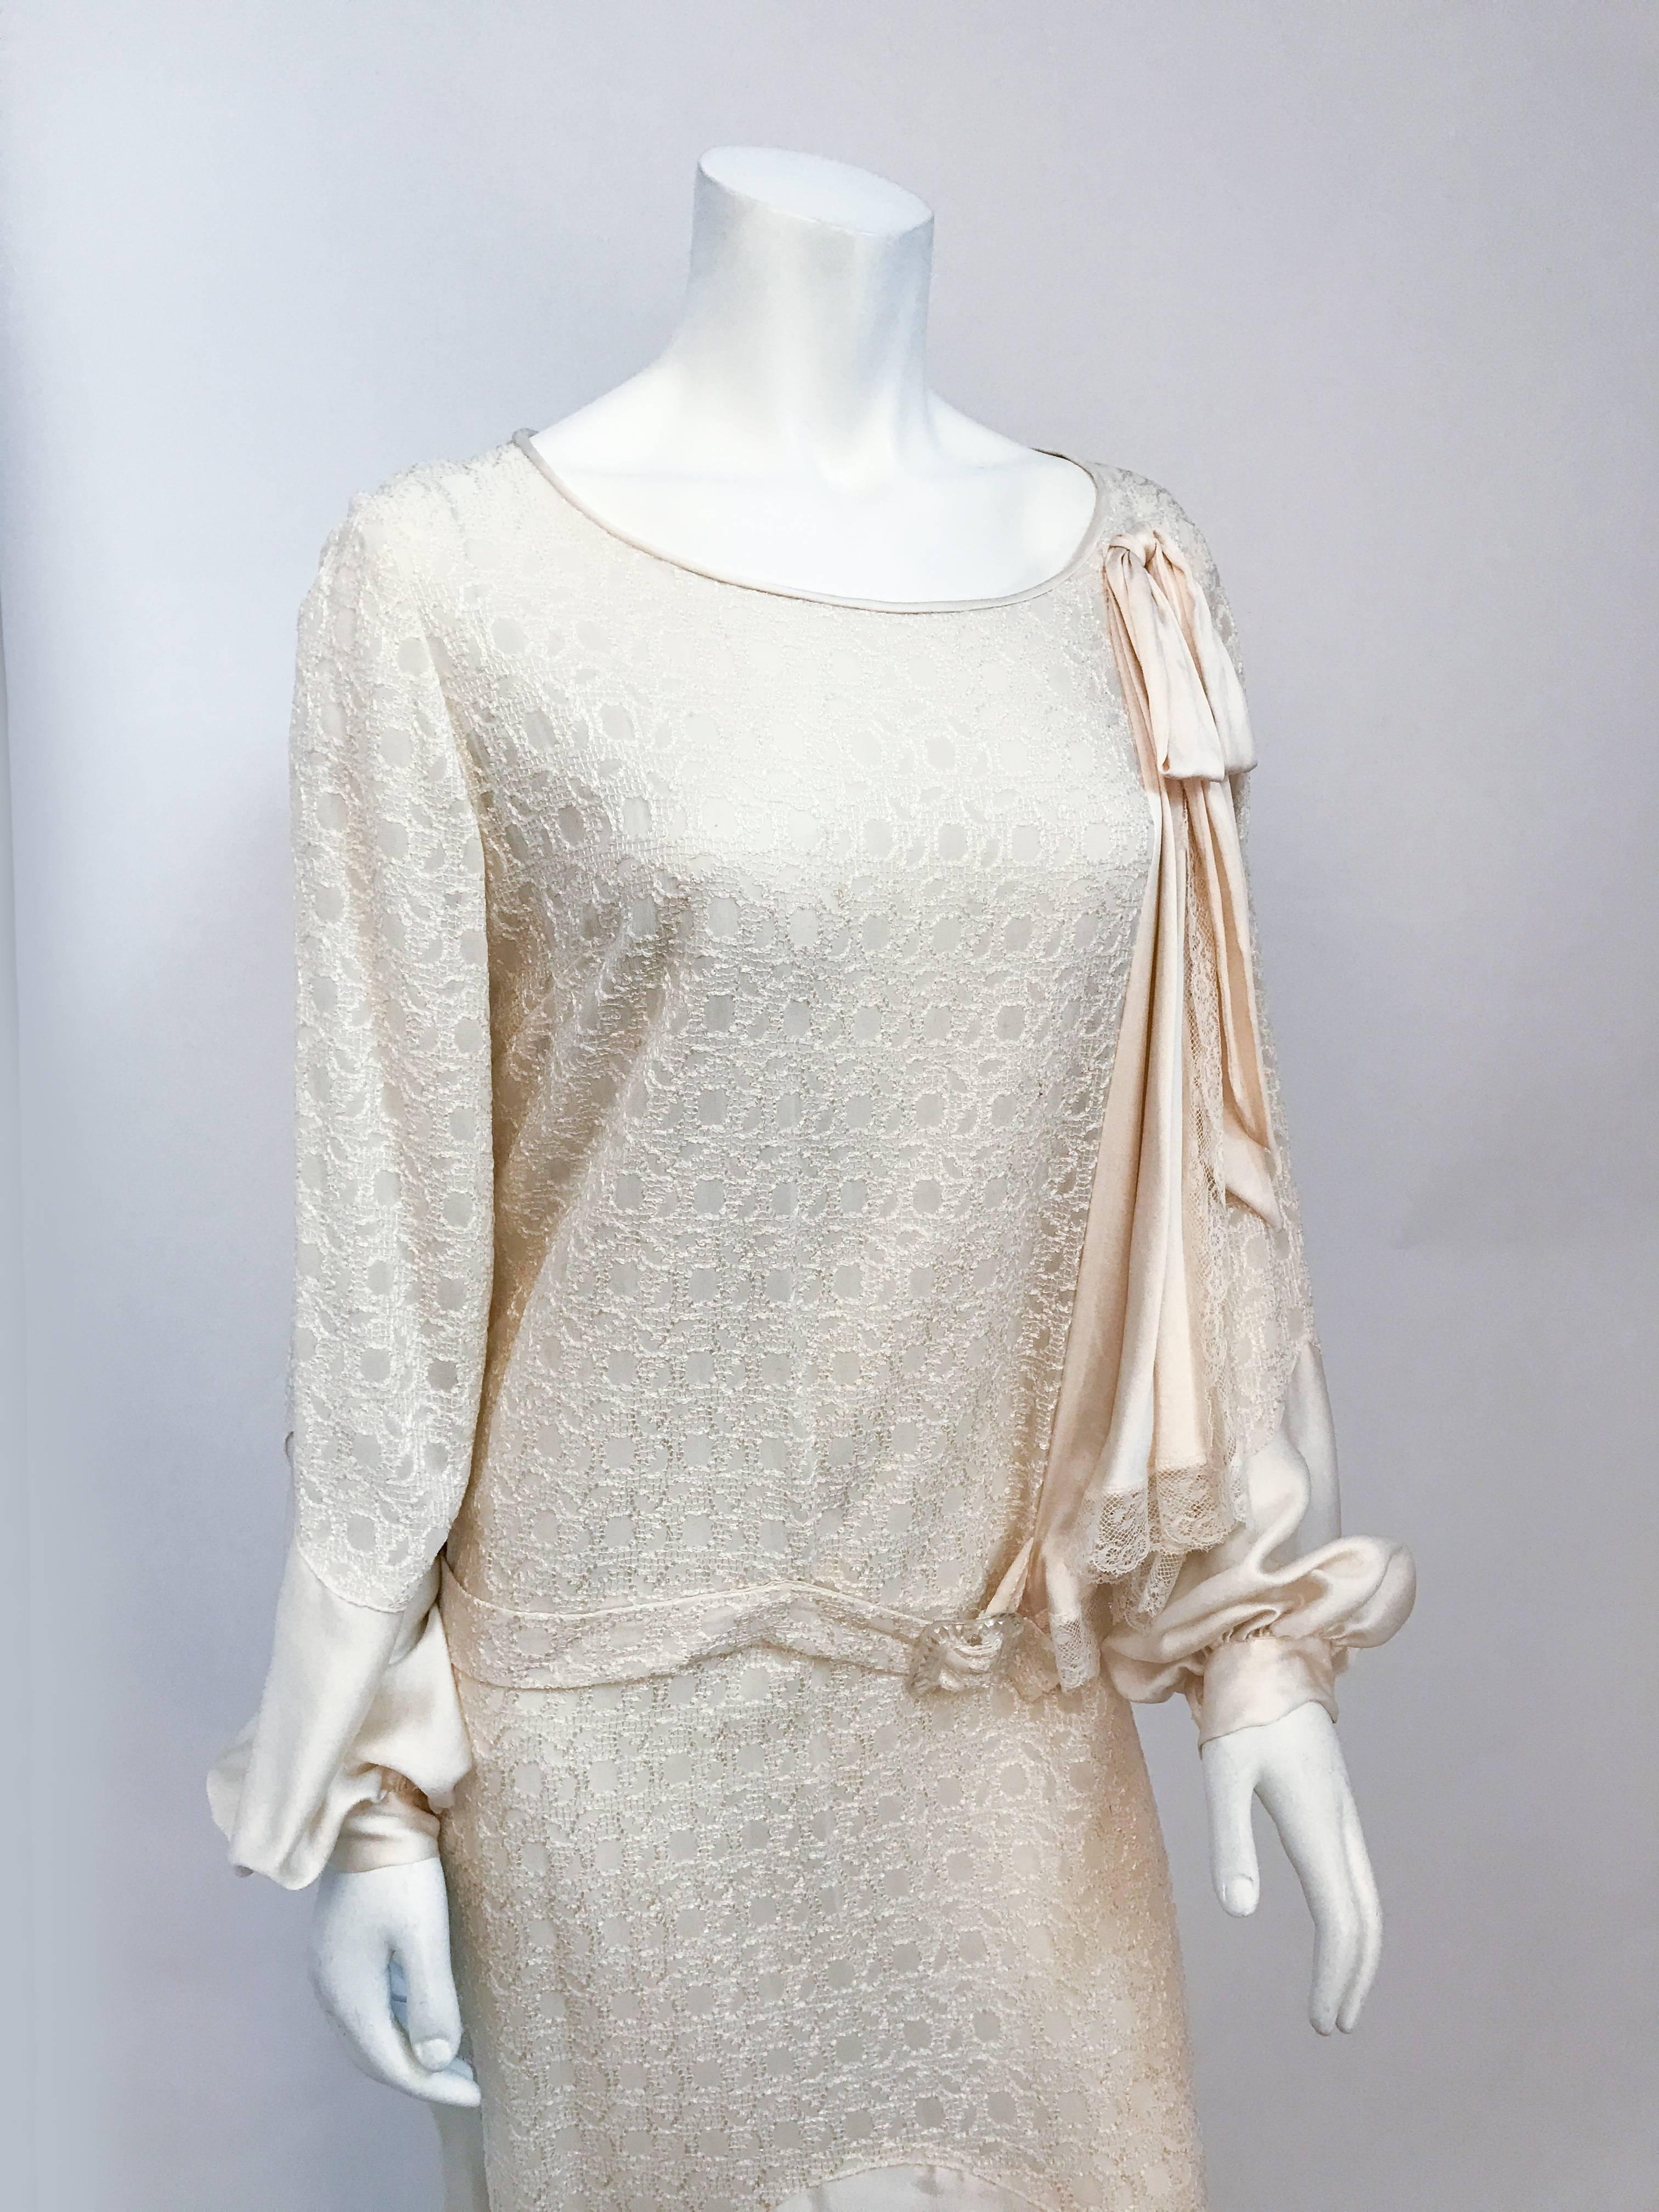 1920s Silk Cream Chiffon and Satin Dress. cream silk chiffon dress with repeated embroidered pattern, long sleeves with snaps near the wrists. Attached belt with clear glass buckle, drop waist, and scoop neck. Multi tiered lace edged asymmetrical